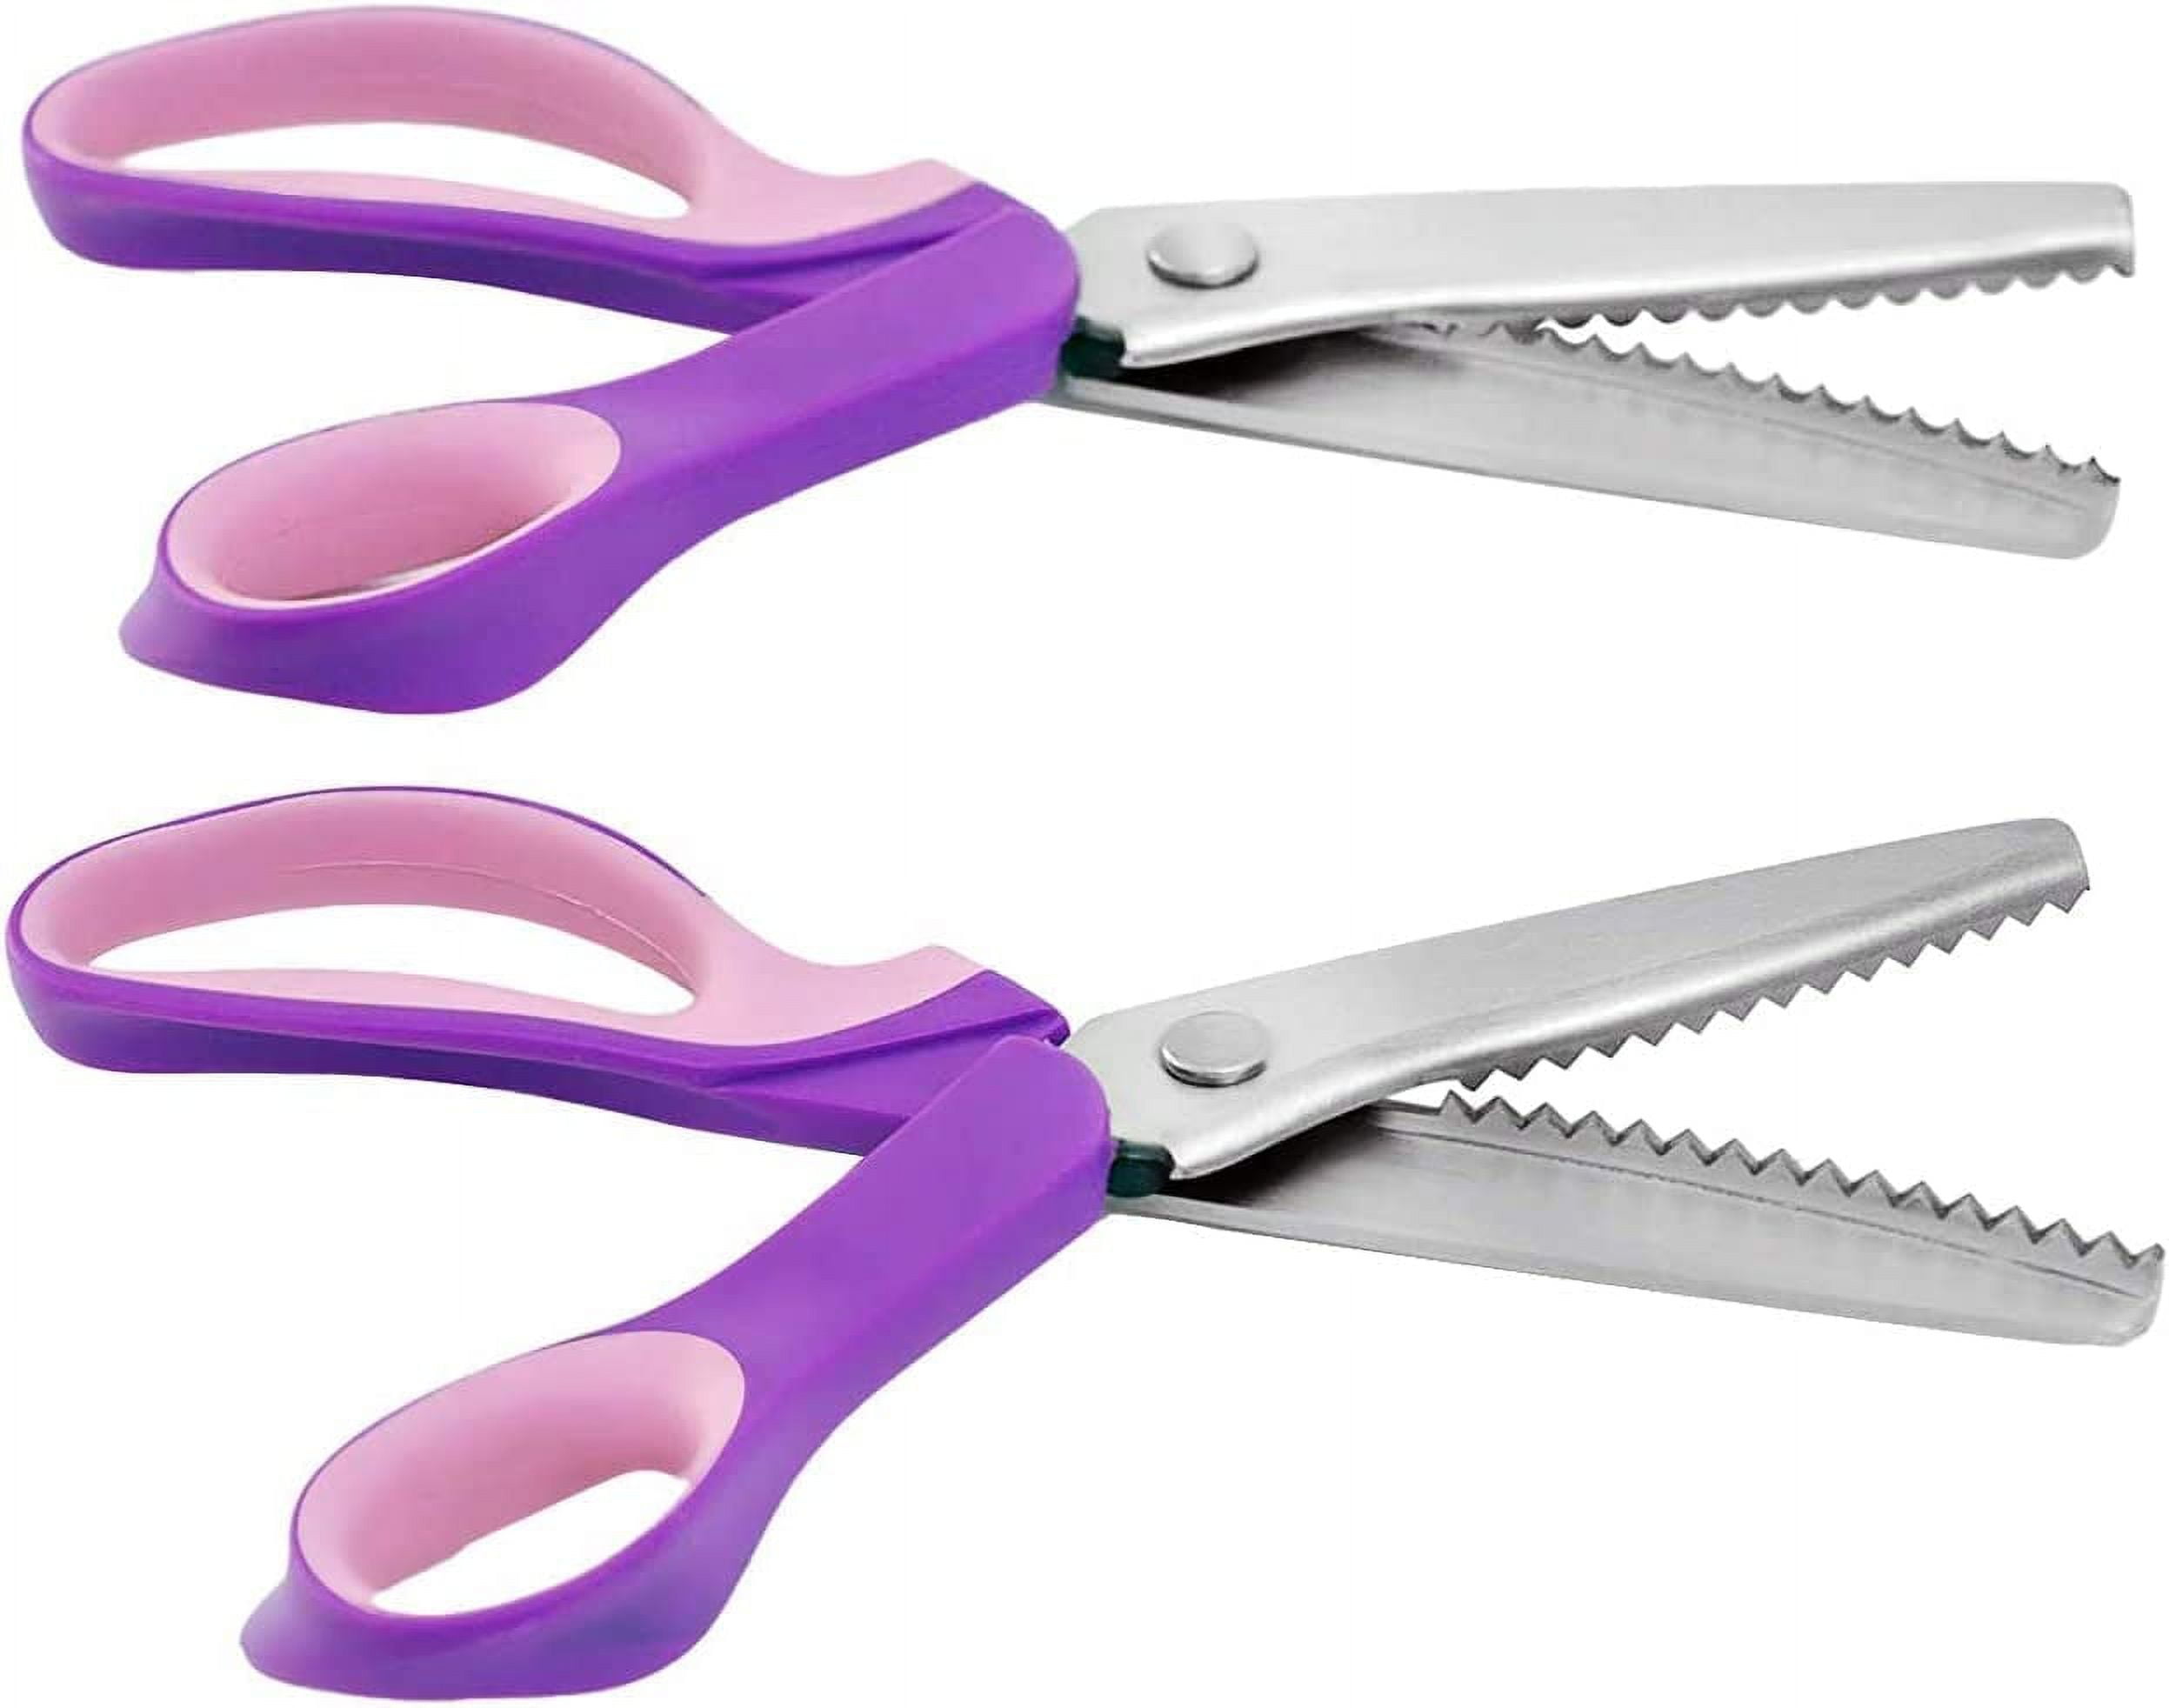 2-Piece Bundle of Zig Zag Scissors & Scalloped Pinking Shears 100%  Stainless Steel Sewing Pinking Shears for Fabric Cutting, Ideal Craft  Scissors